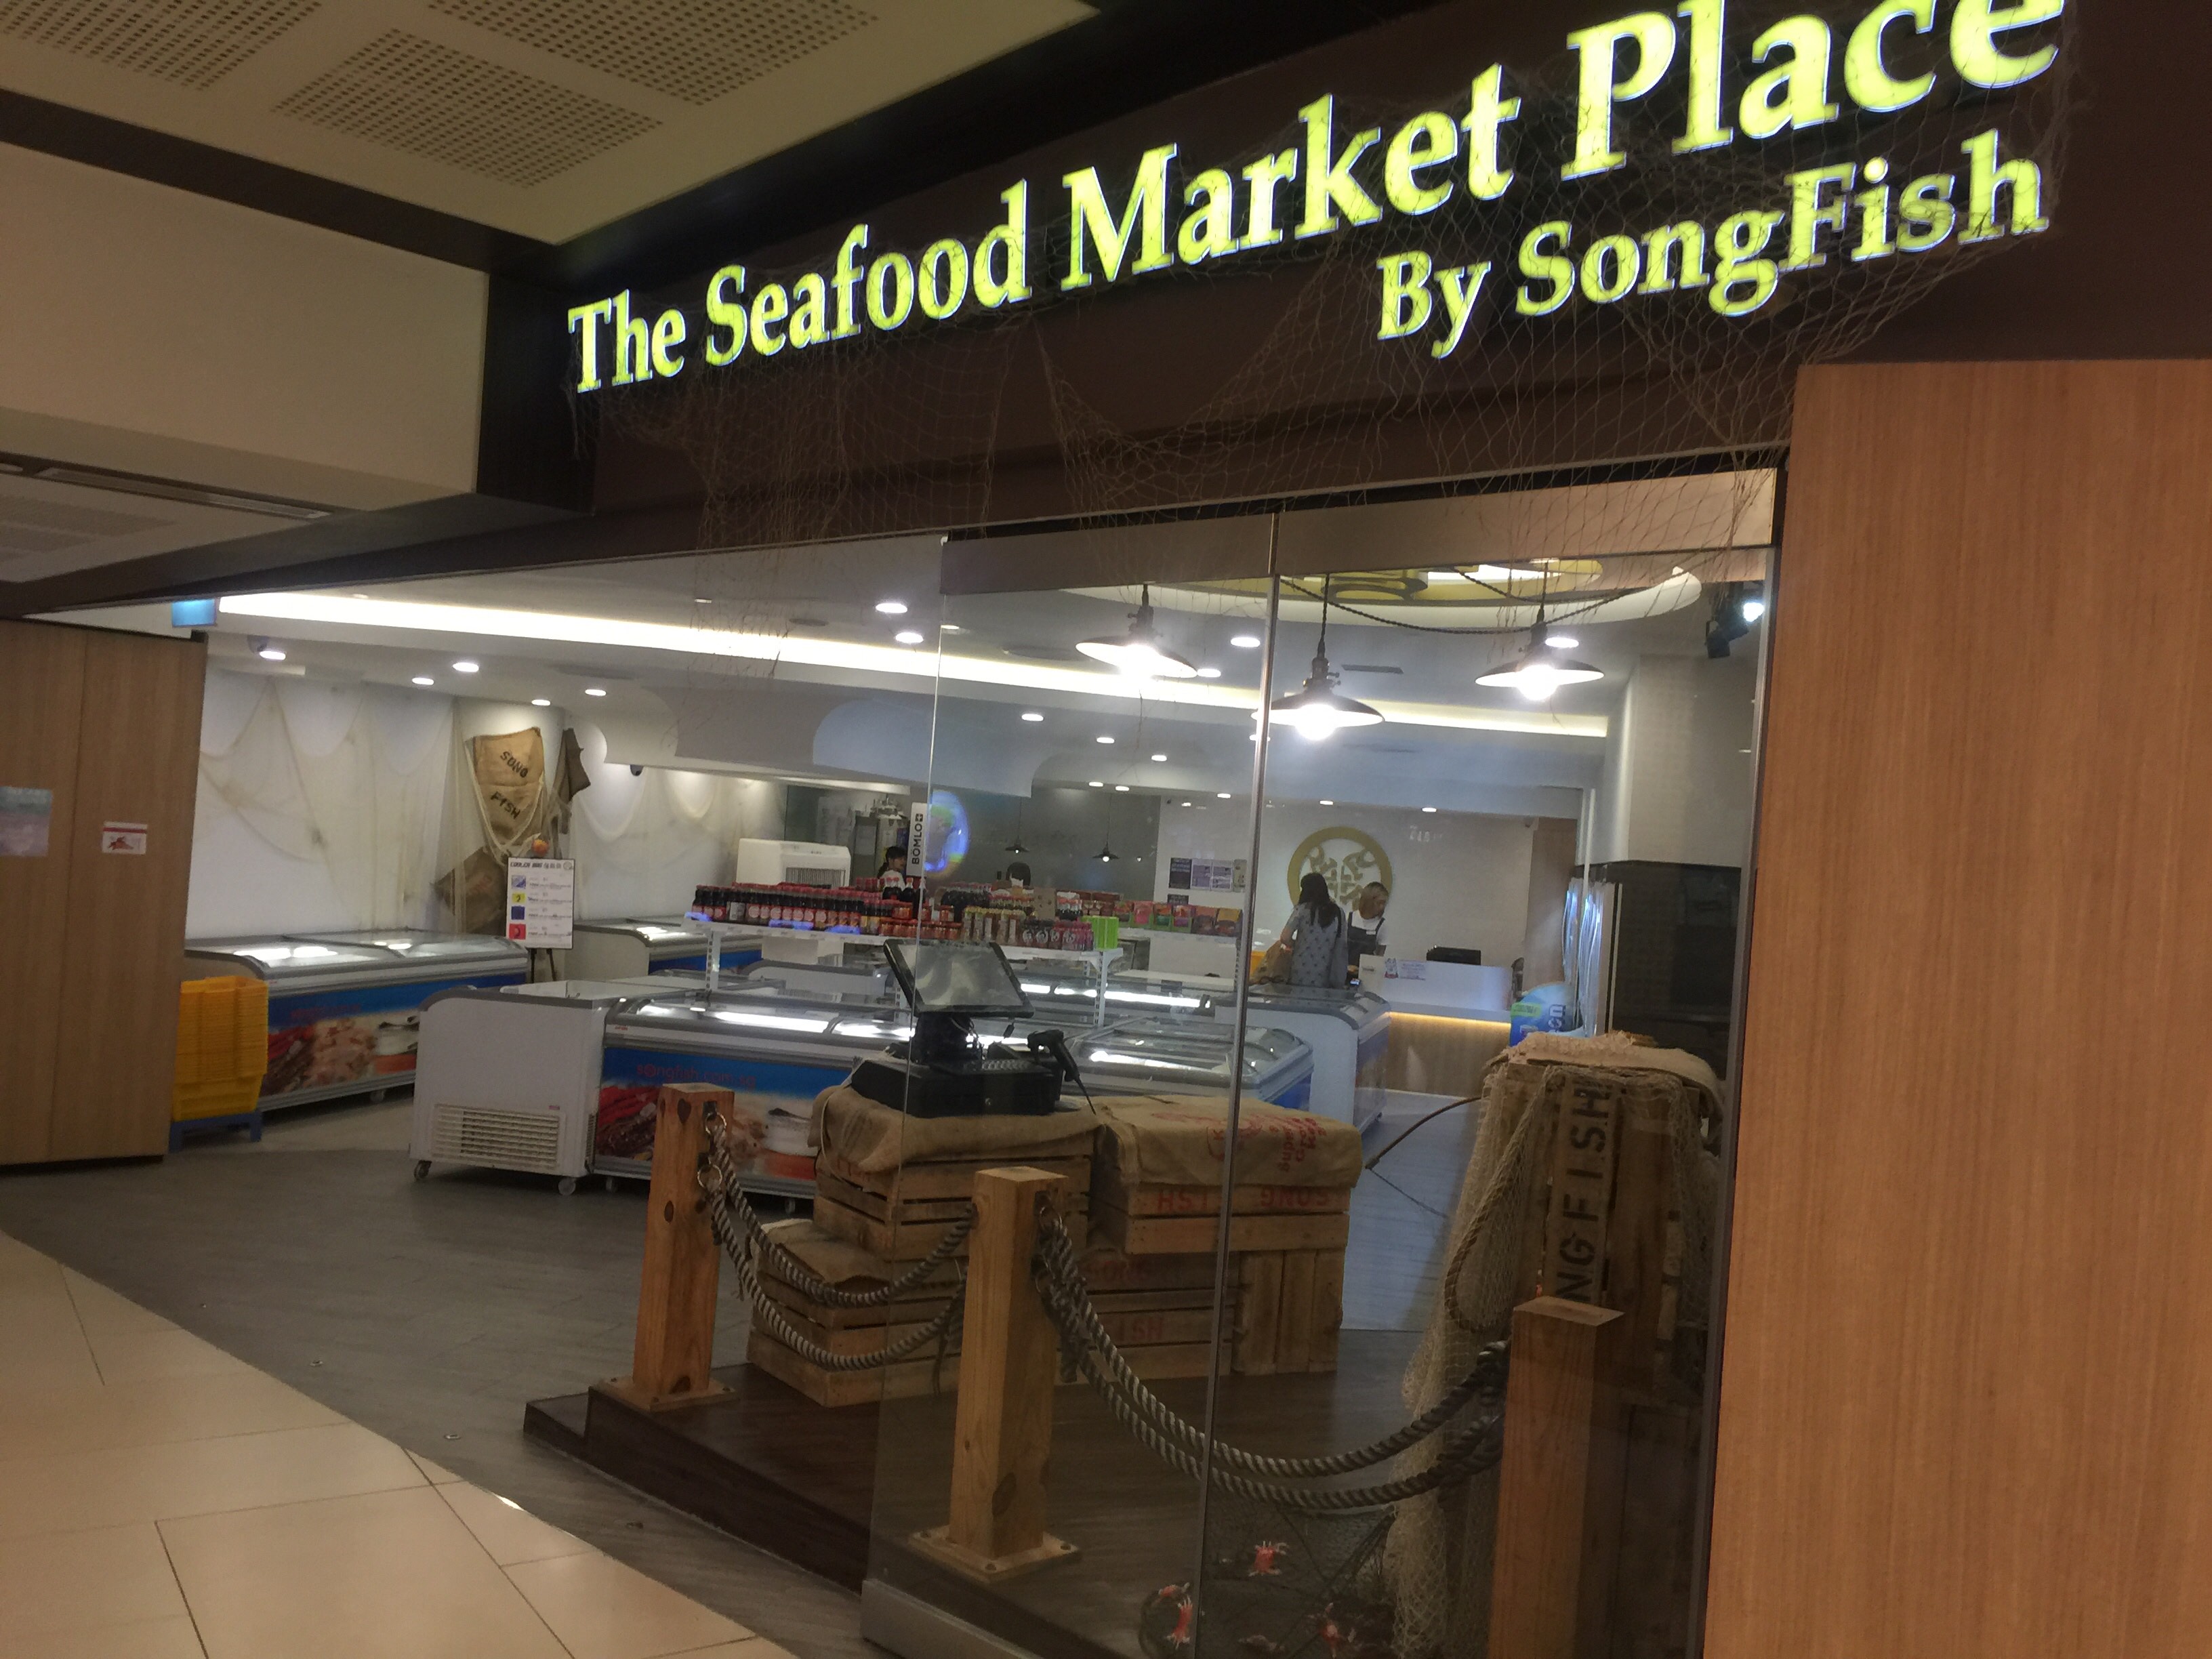 The Seafood Market Place By Song Fish 